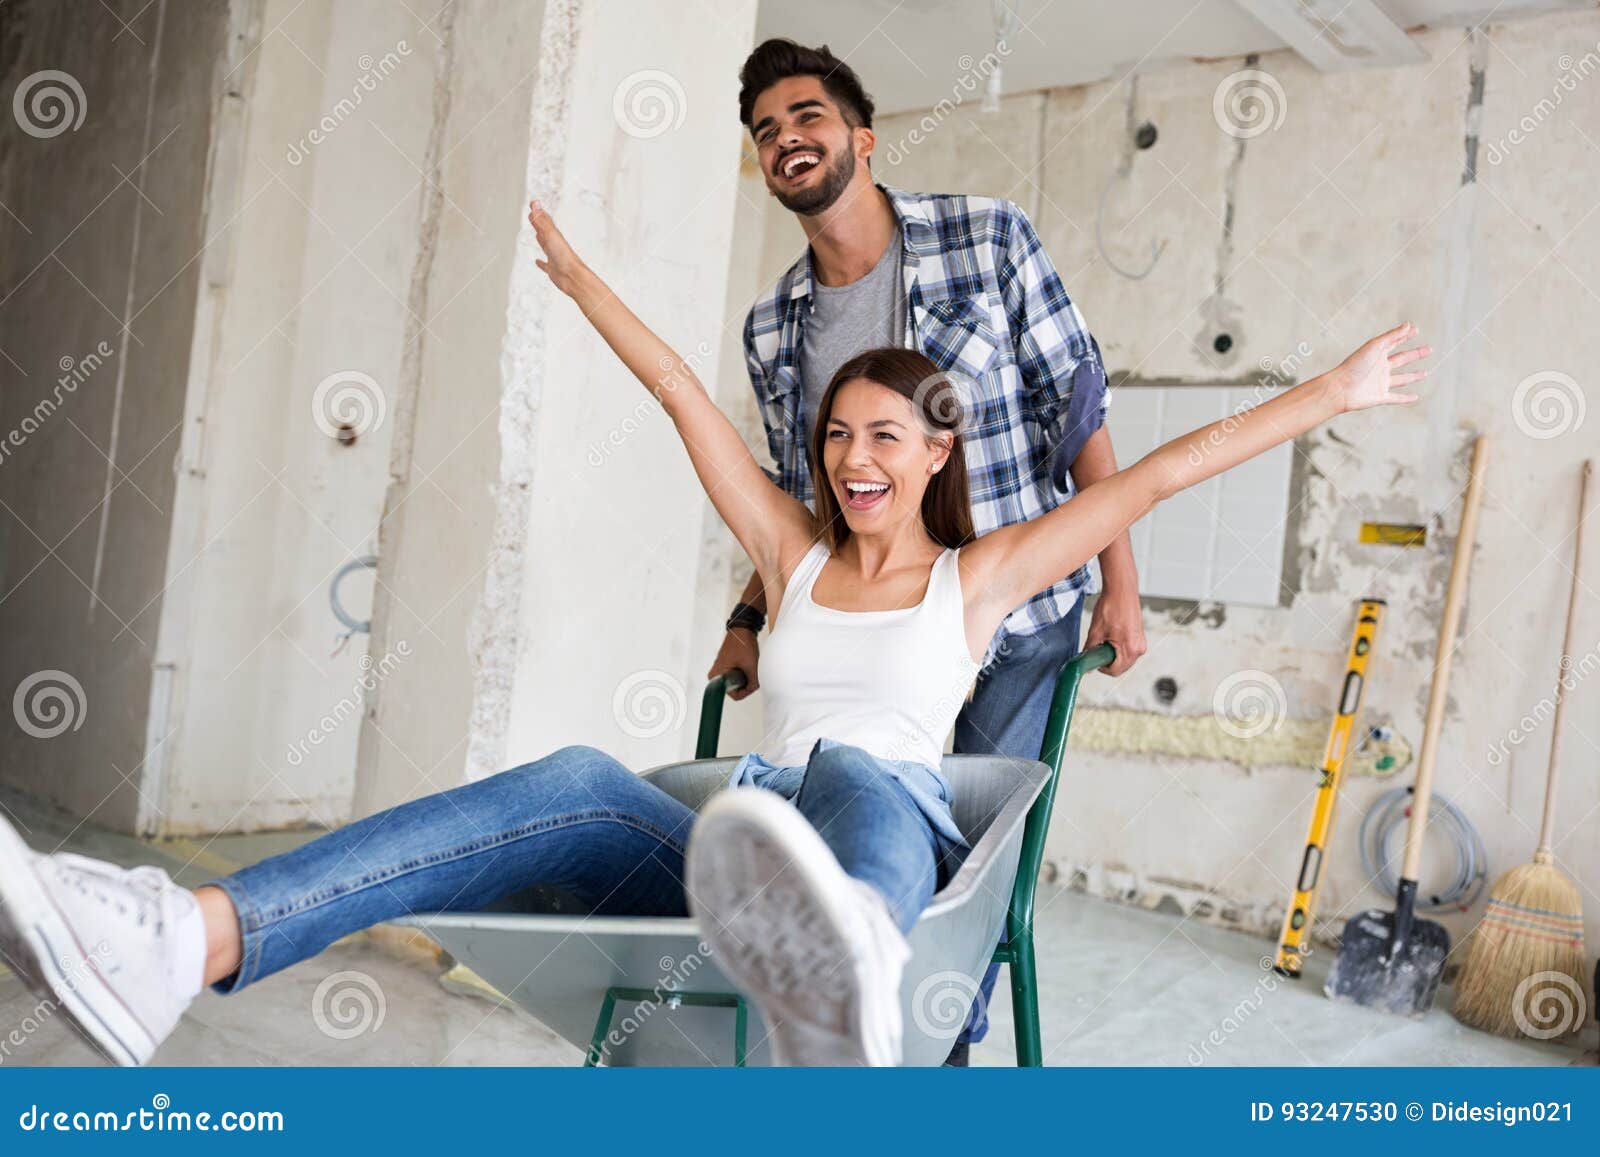 loving couple is having fun while they are renovating house